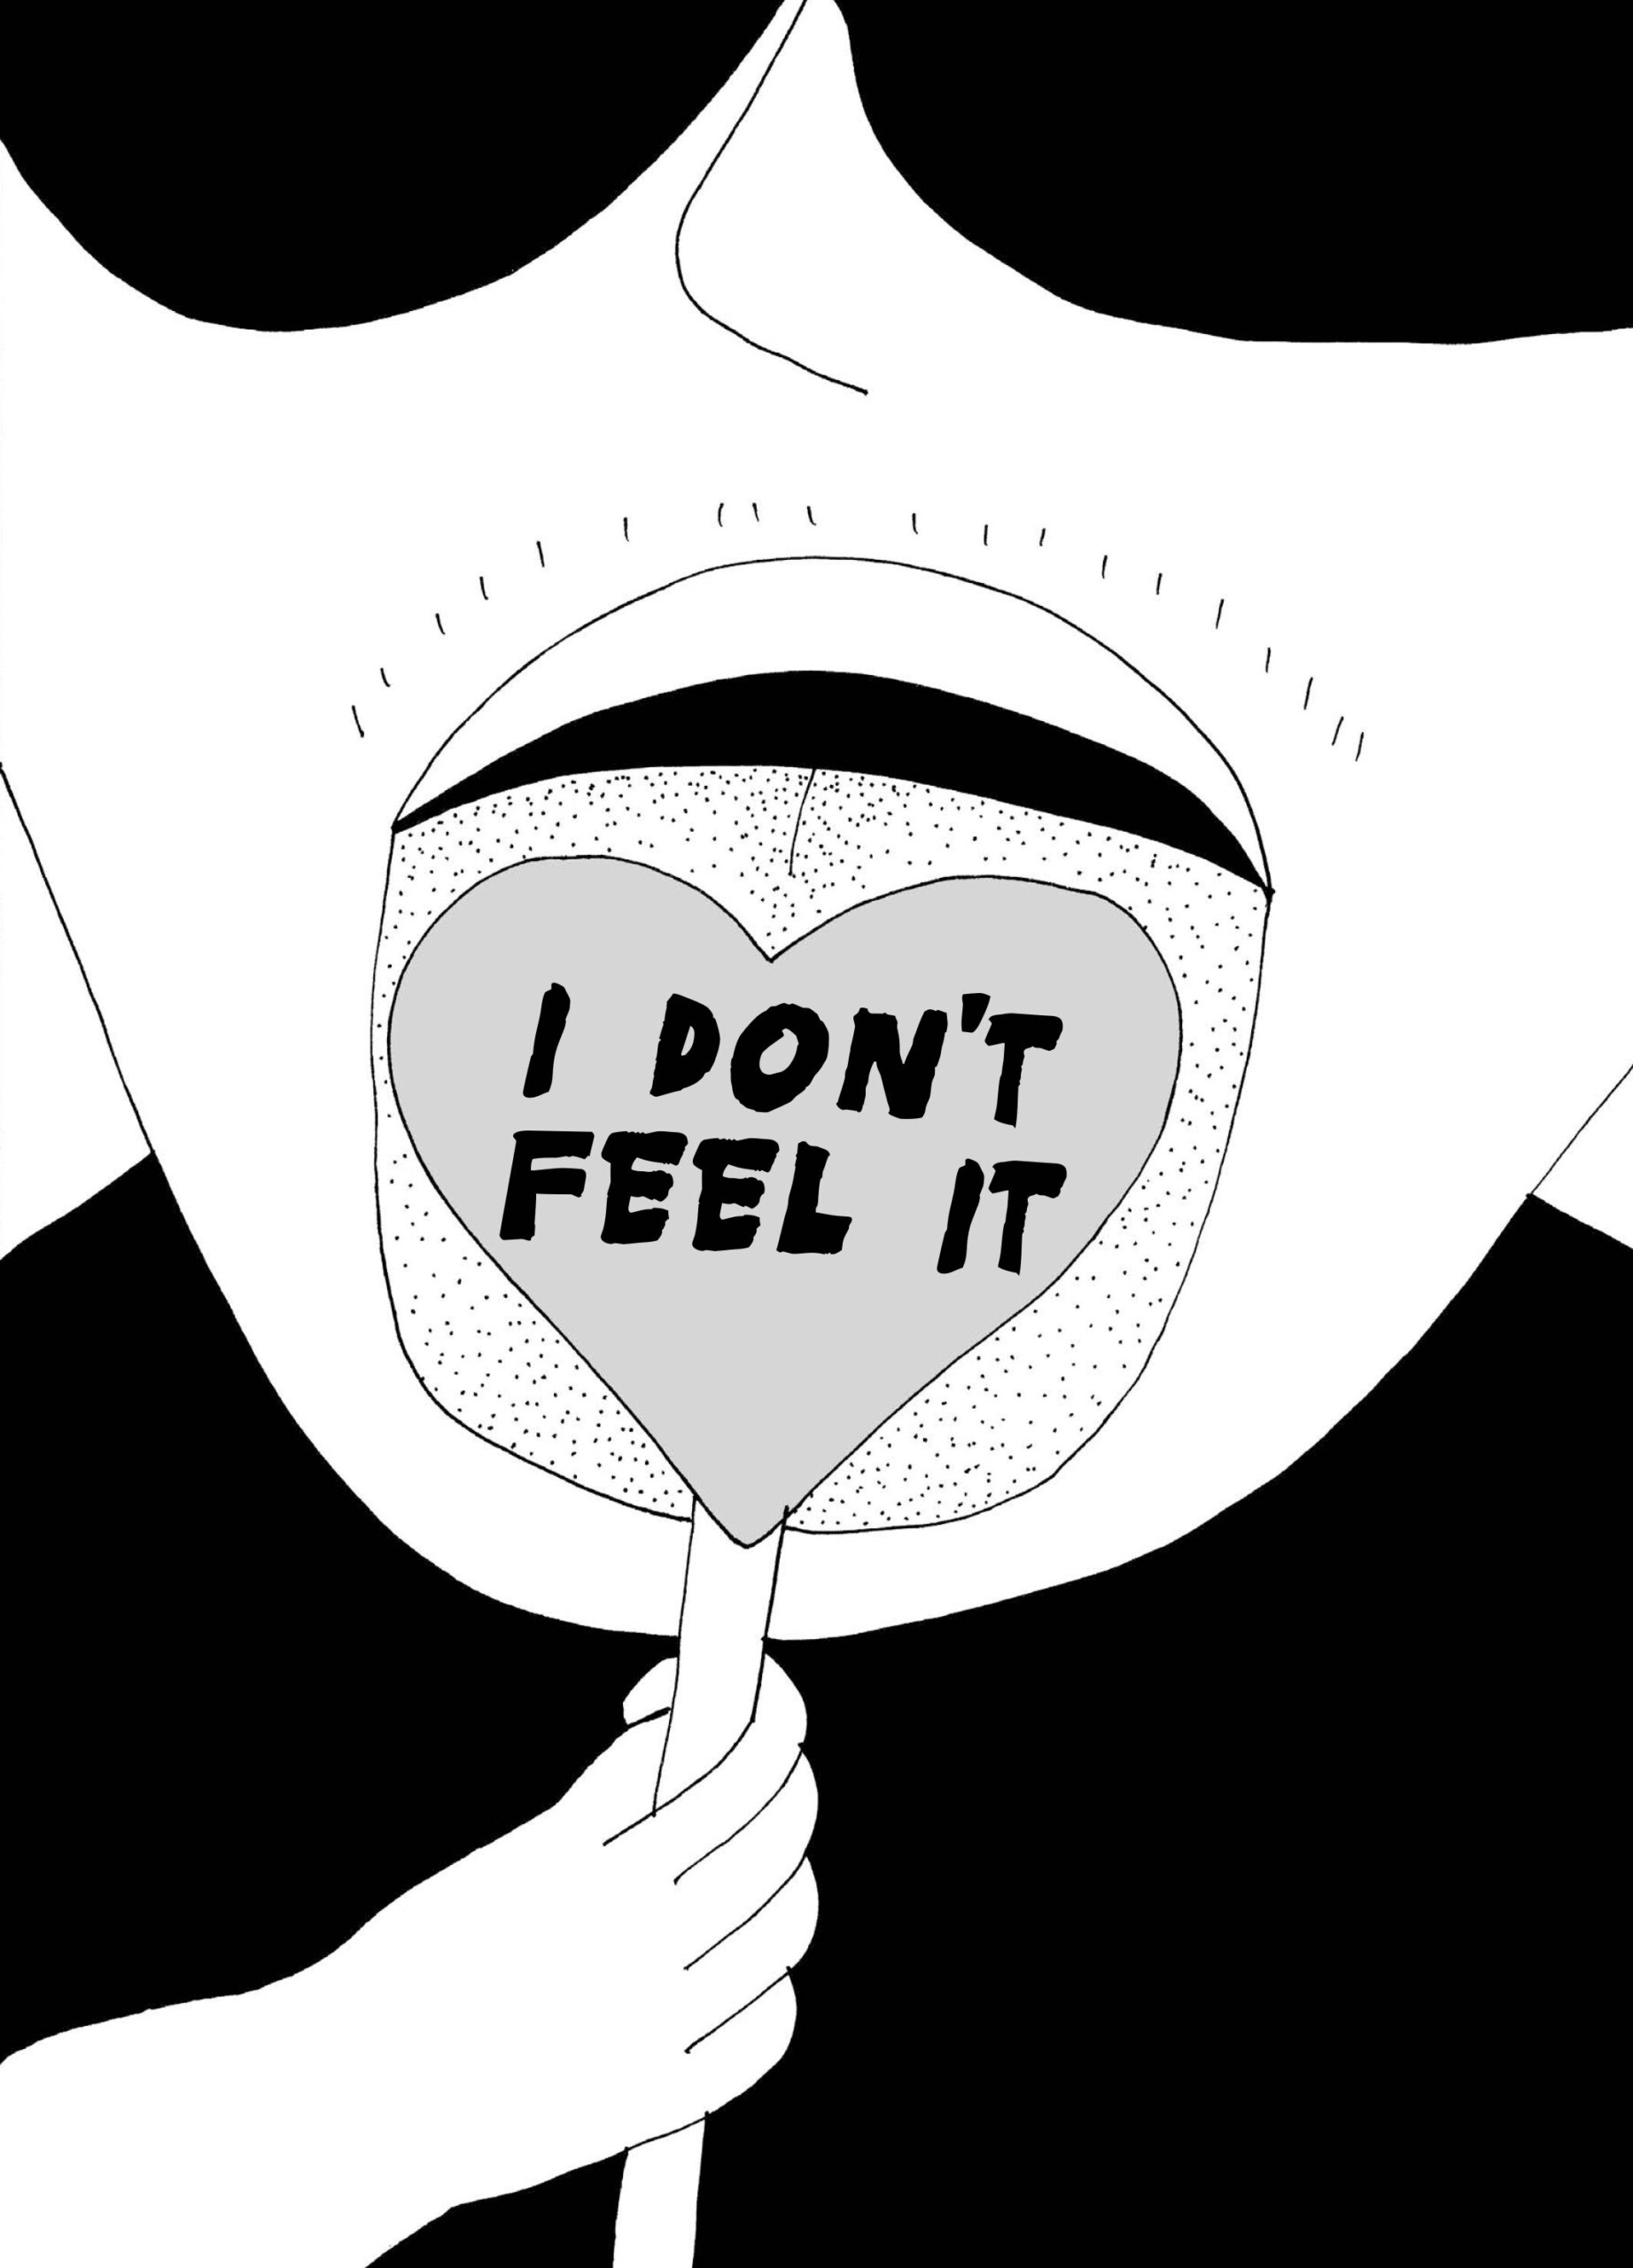 Panel from "The Reddest Rose" with a man licking a heart-shaped lollipop that reads "I DON'T FEEL IT"